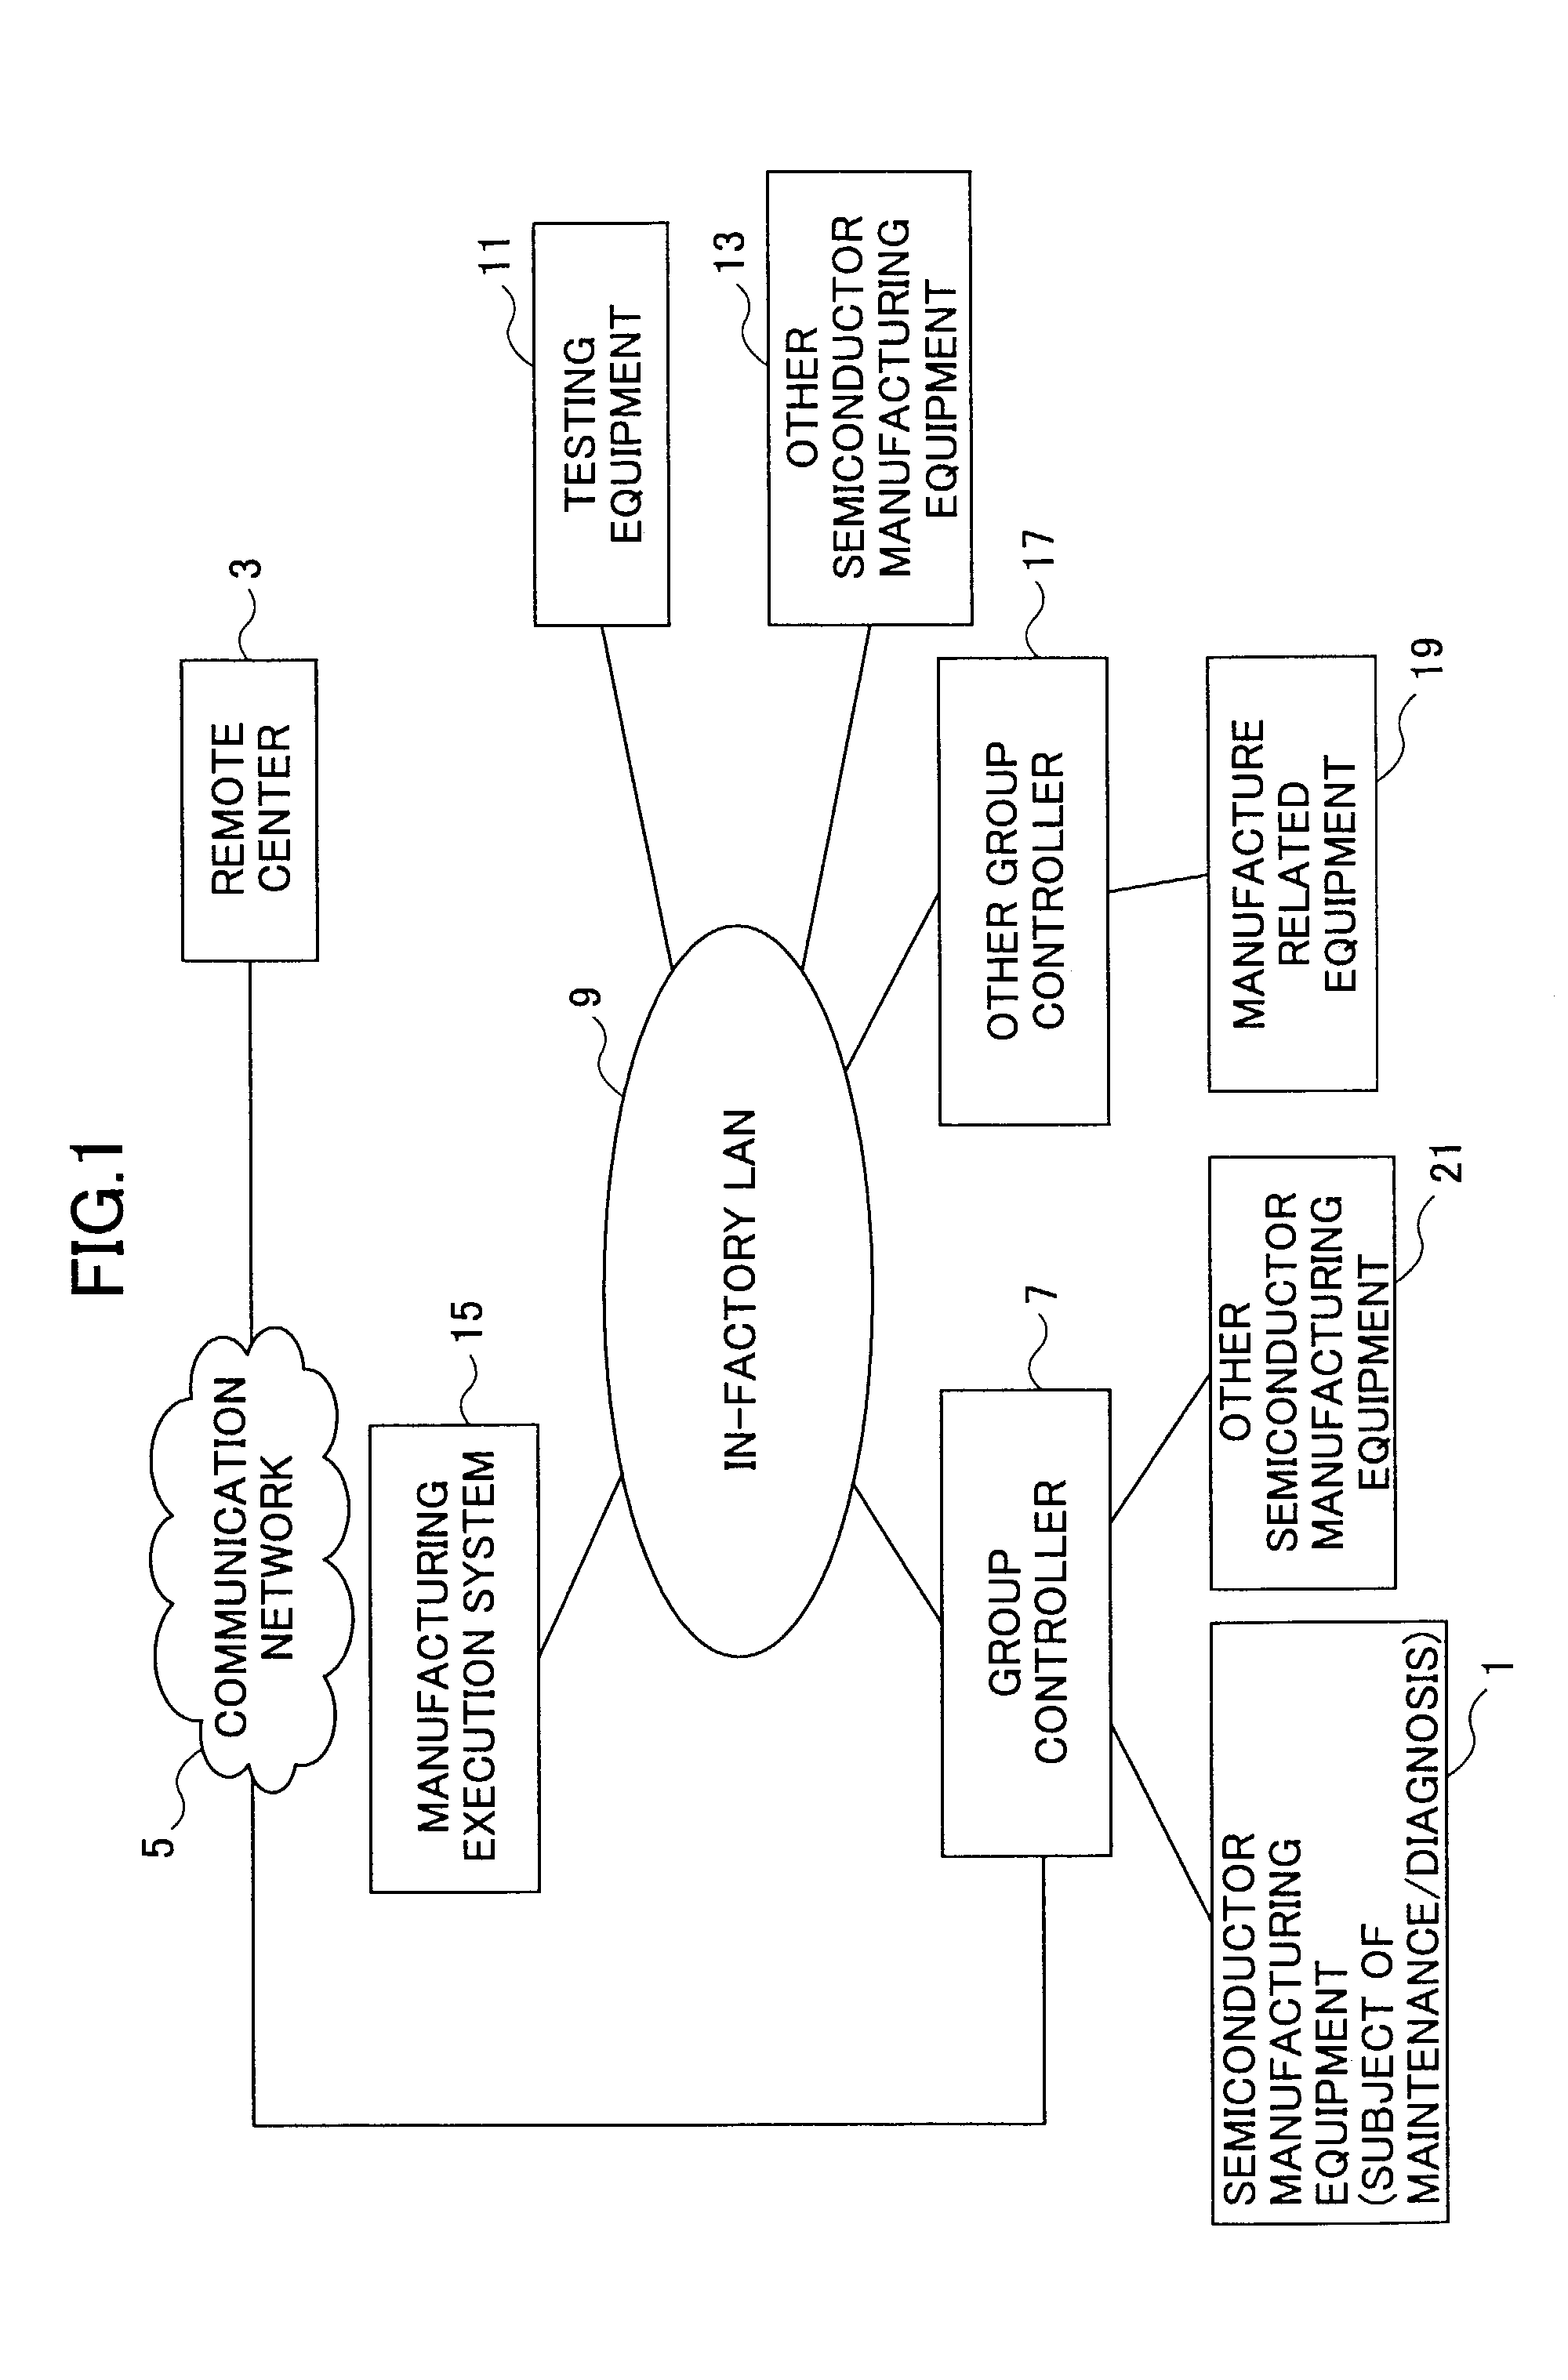 Method for collecting remote maintenance and diagnostic data from subject equipment, other device and manufacturing execution system